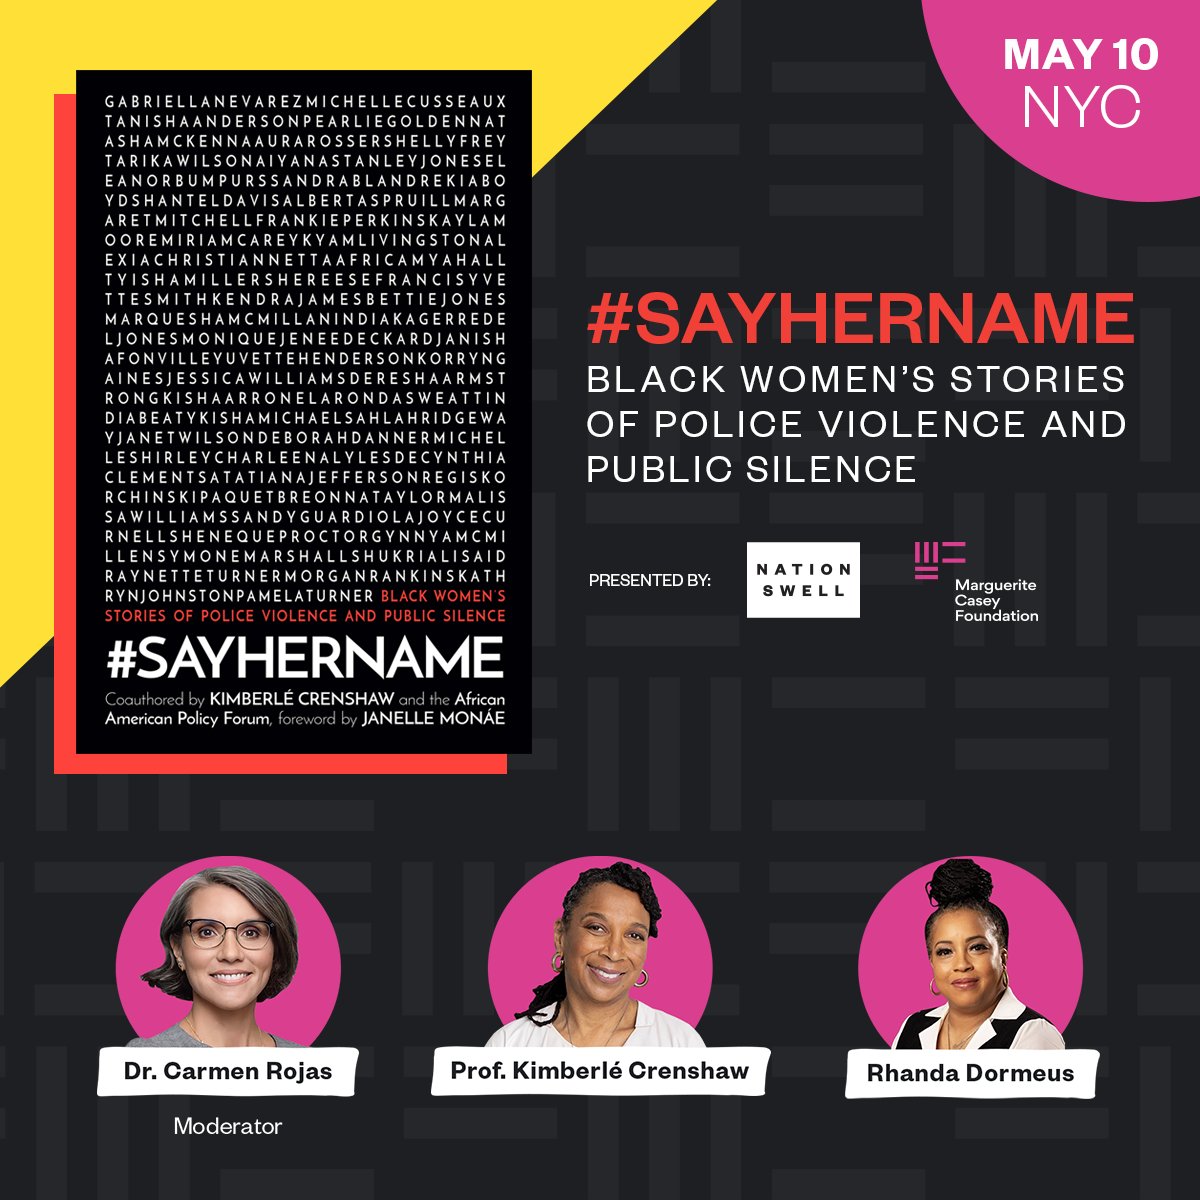 AAPF is thrilled to join @NationSwell and @caseygrants in Chelsea, NY on May 10th for the #MCFBookClub discussion on #SAYHERNAME: Black Women’s Stories of Police Violence and Public Silence with @sandylocks